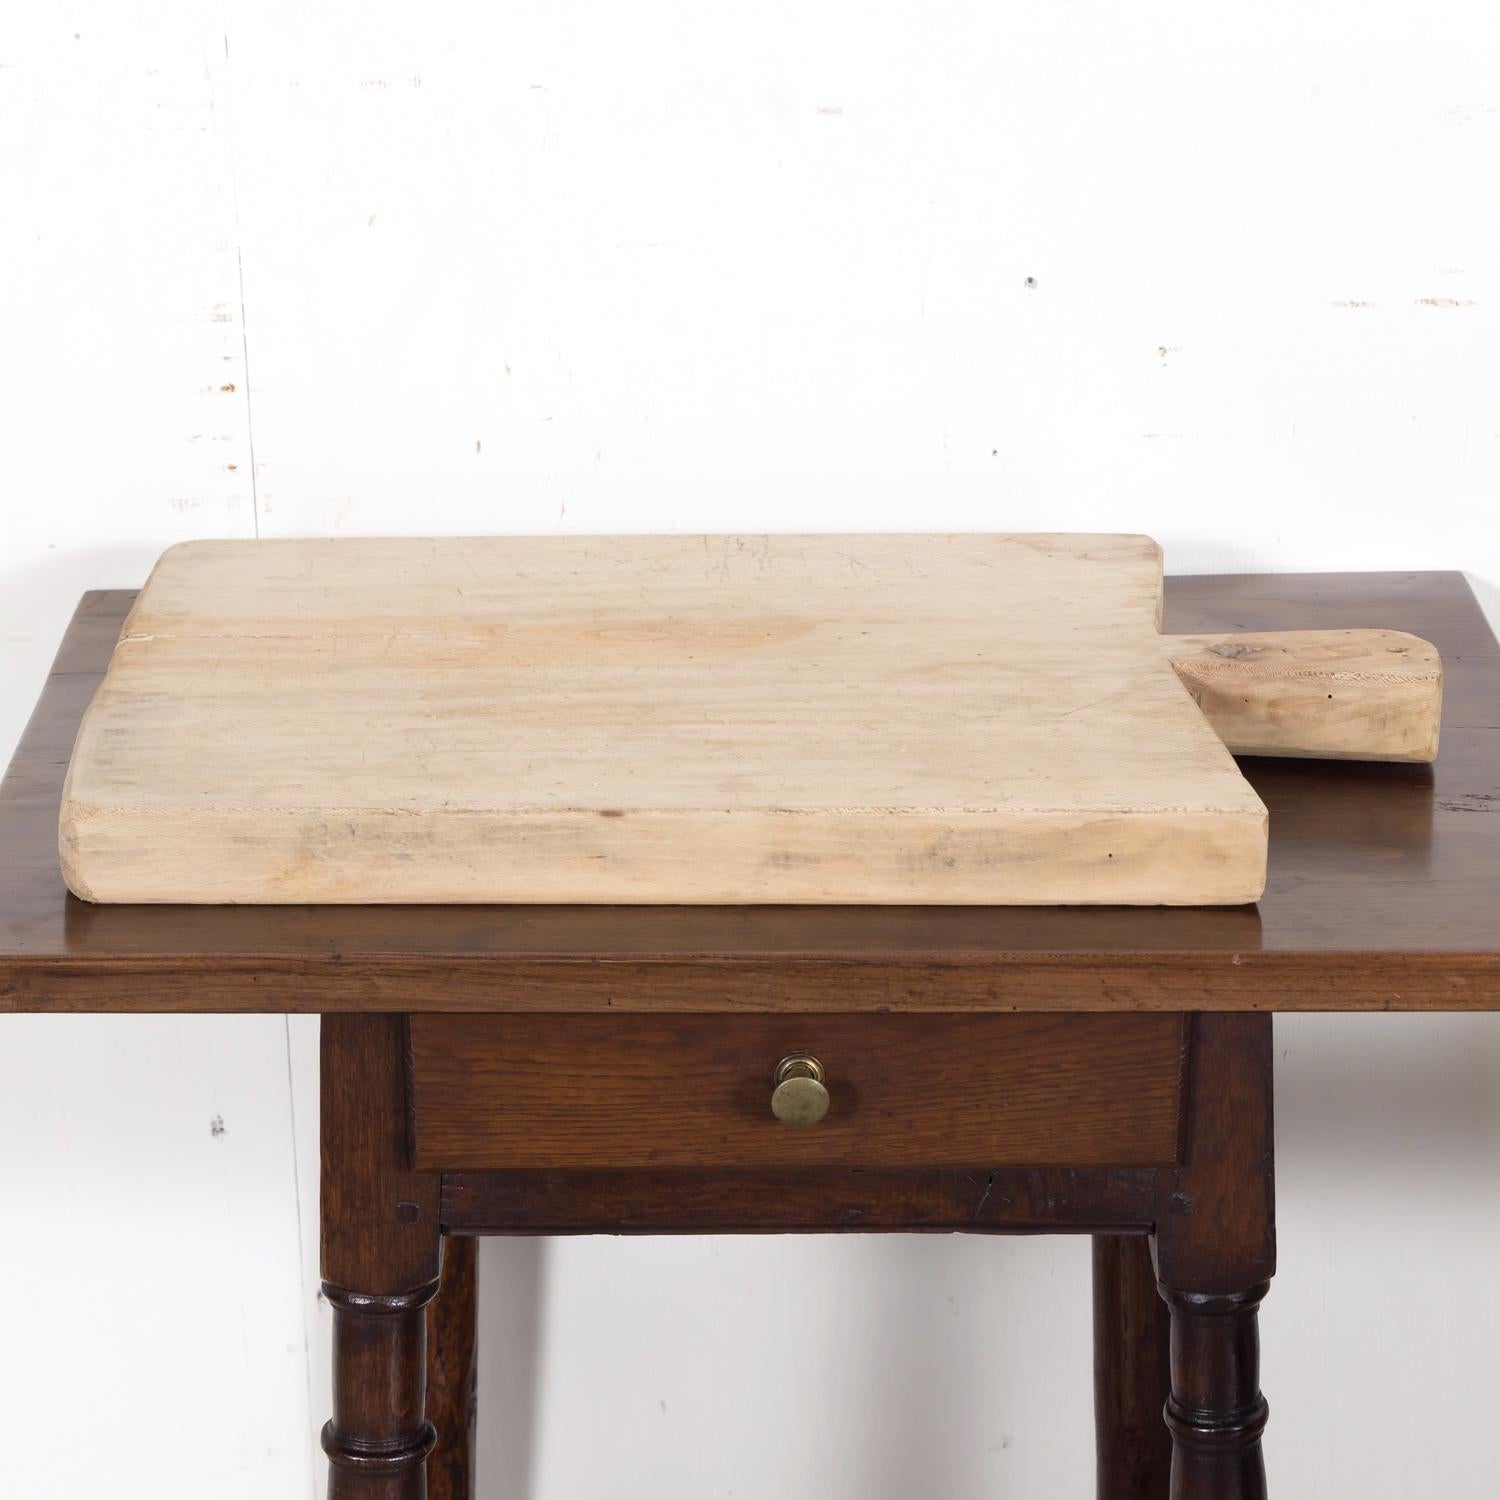 Large 19th Century Antique French Country Bleached Breadboard or Cutting Board  For Sale 3